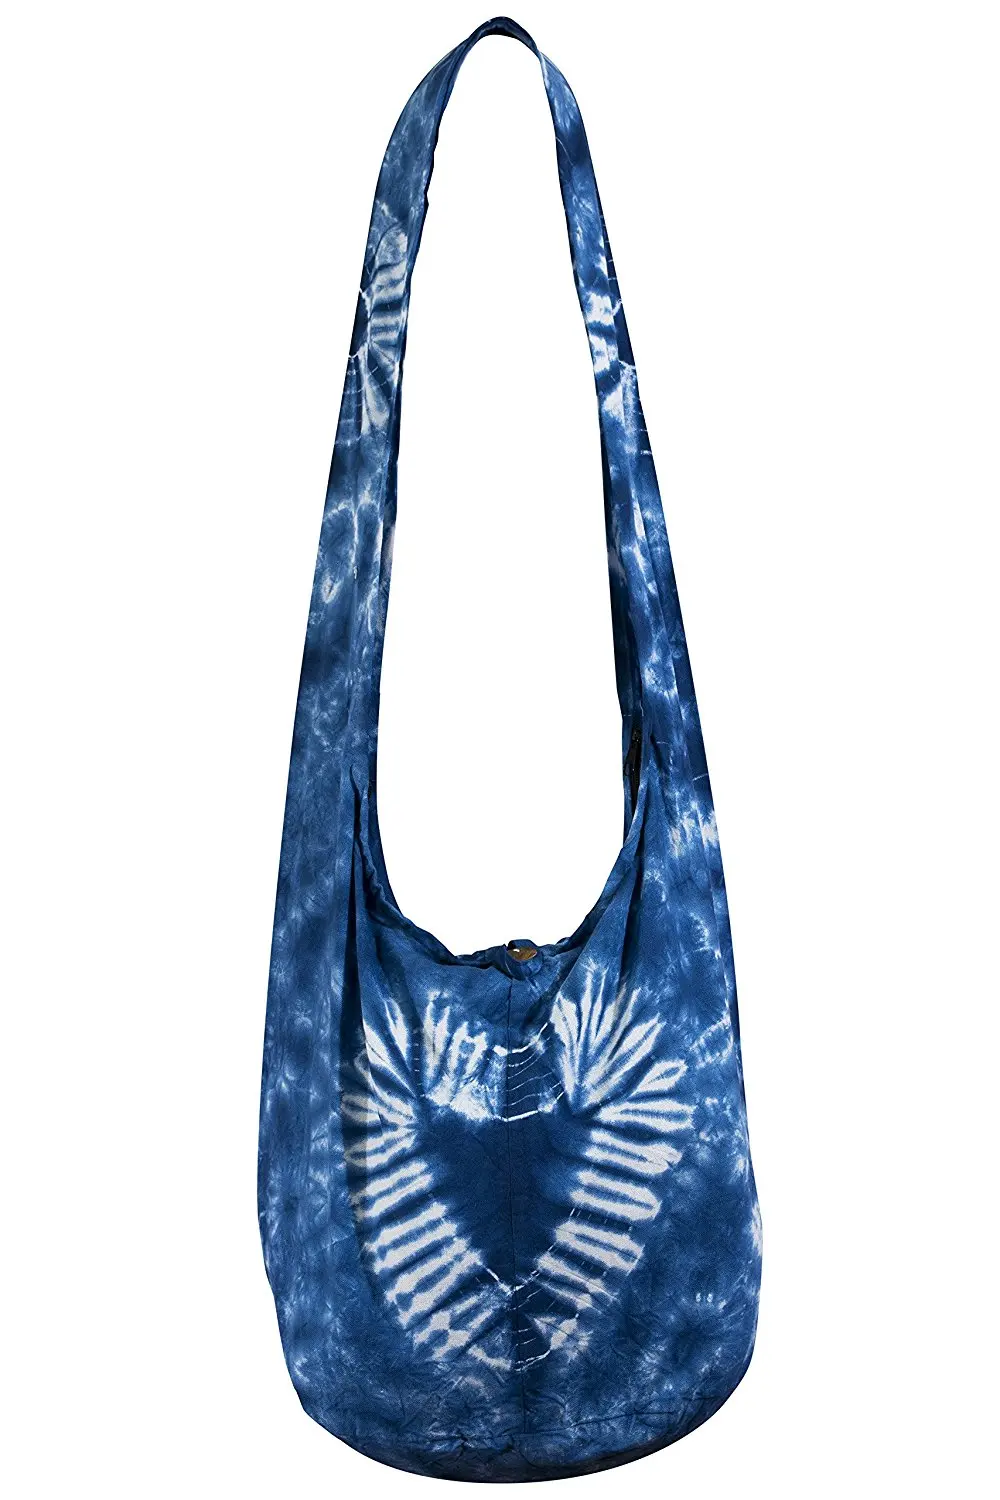 Cheap Printed Cotton Sling Bag, find Printed Cotton Sling Bag deals on ...